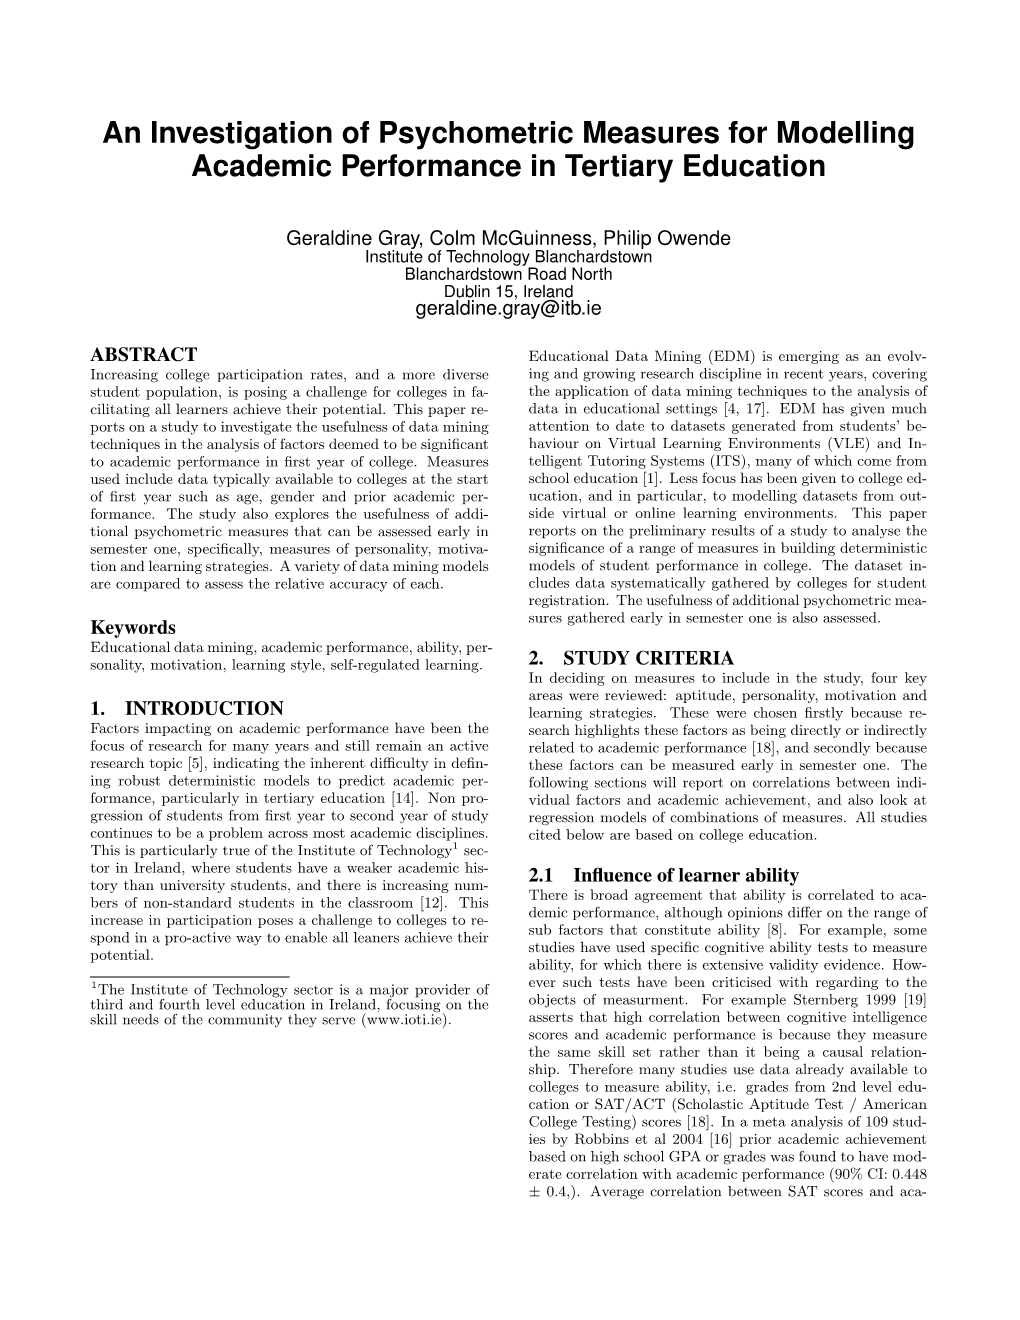 An Investigation of Psychometric Measures for Modelling Academic Performance in Tertiary Education